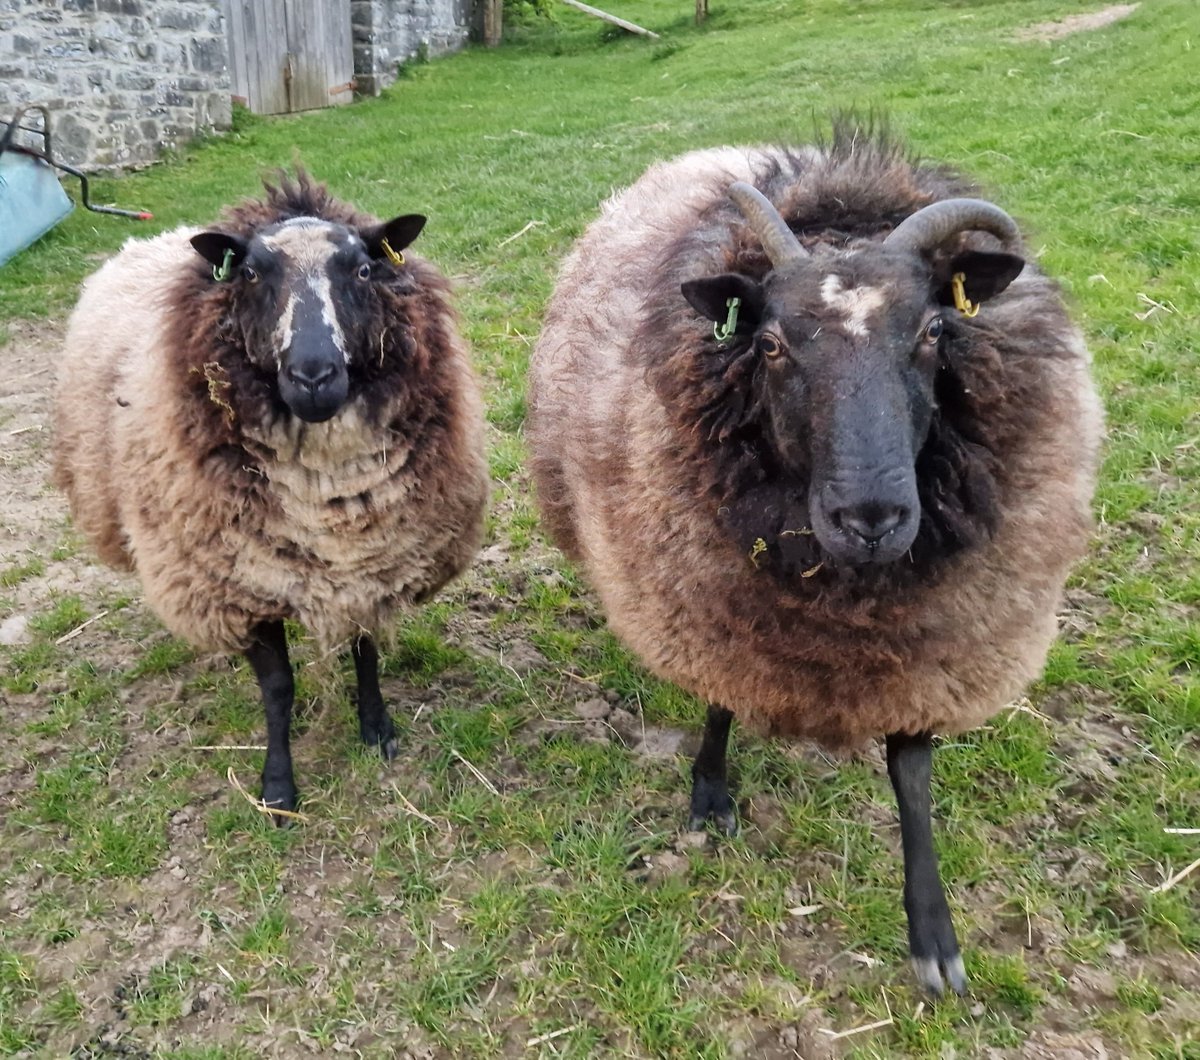 Smout and Ellie have to stay with the old girls until after shearing in June. Ellie has an absolutely humongous fleece and a tendency to roll on her back and get stuck so I need her where I can keep a close eye on her

#animalsanctuary #sheep365 

woollypatchworksheepsanctuary.uk